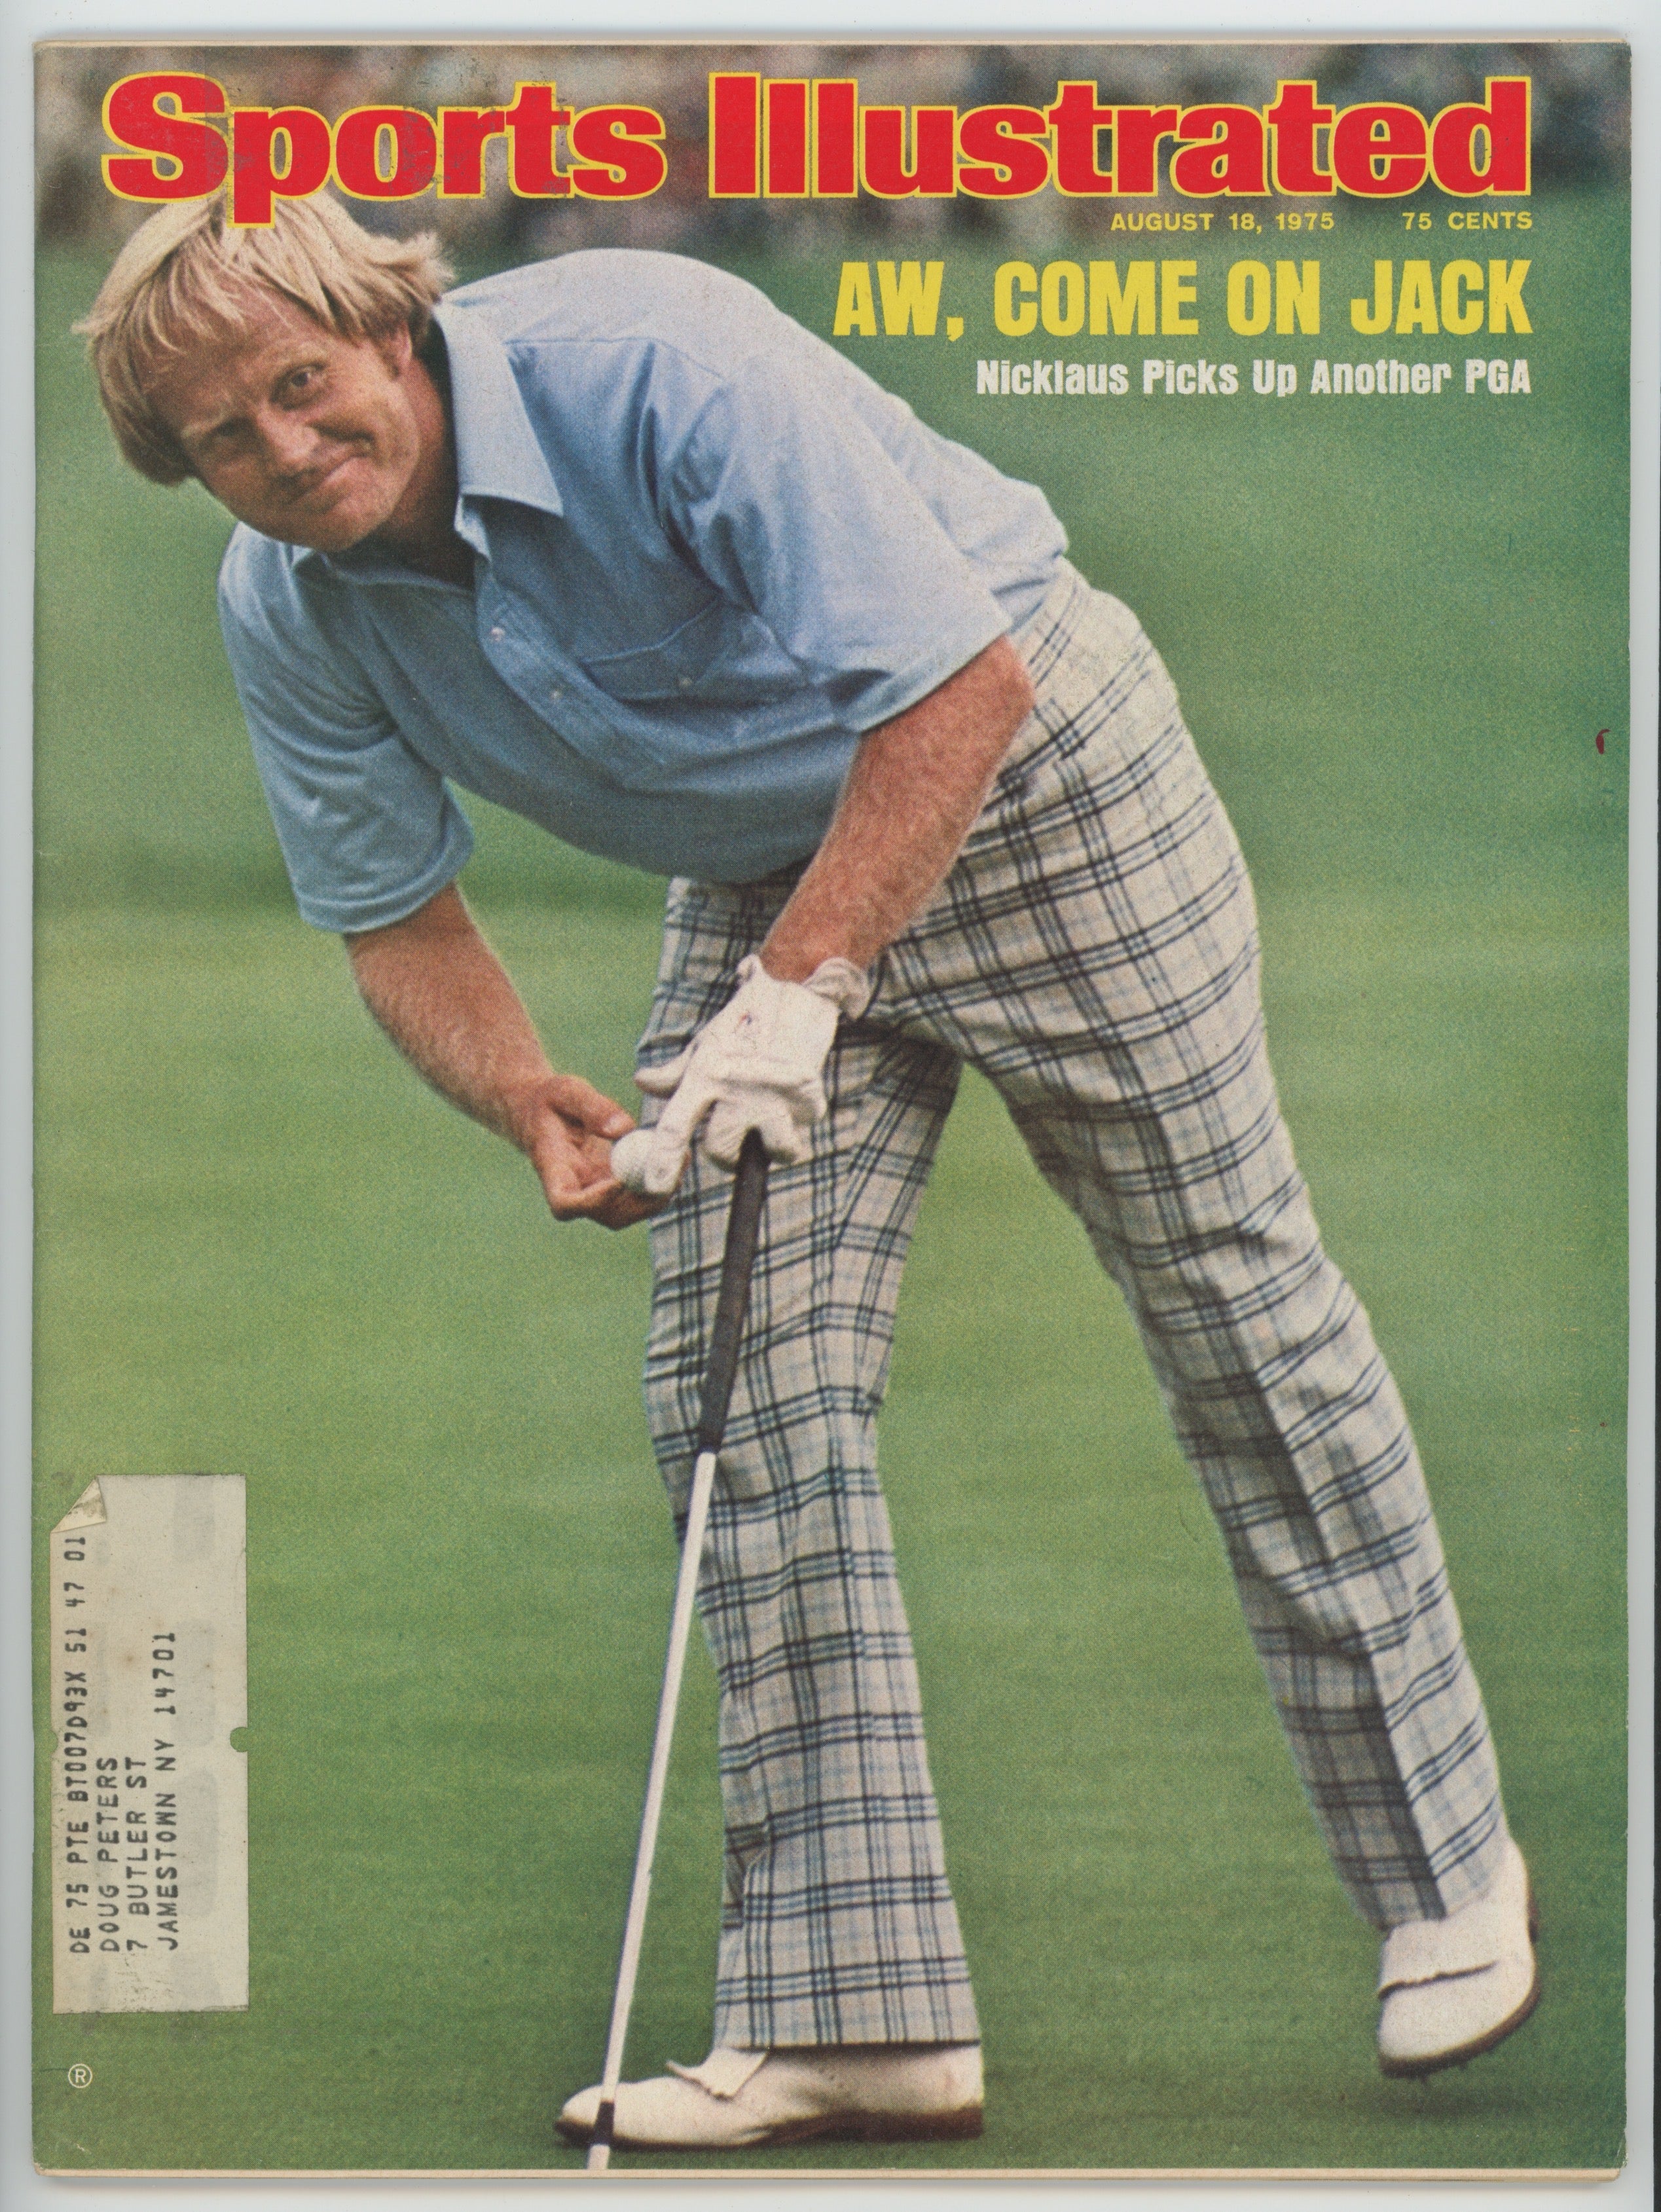 Jack Nicklaus “Aw, Come on Jack, Nicklaus Picks Up Another PGA” 8/18/75 EX ML